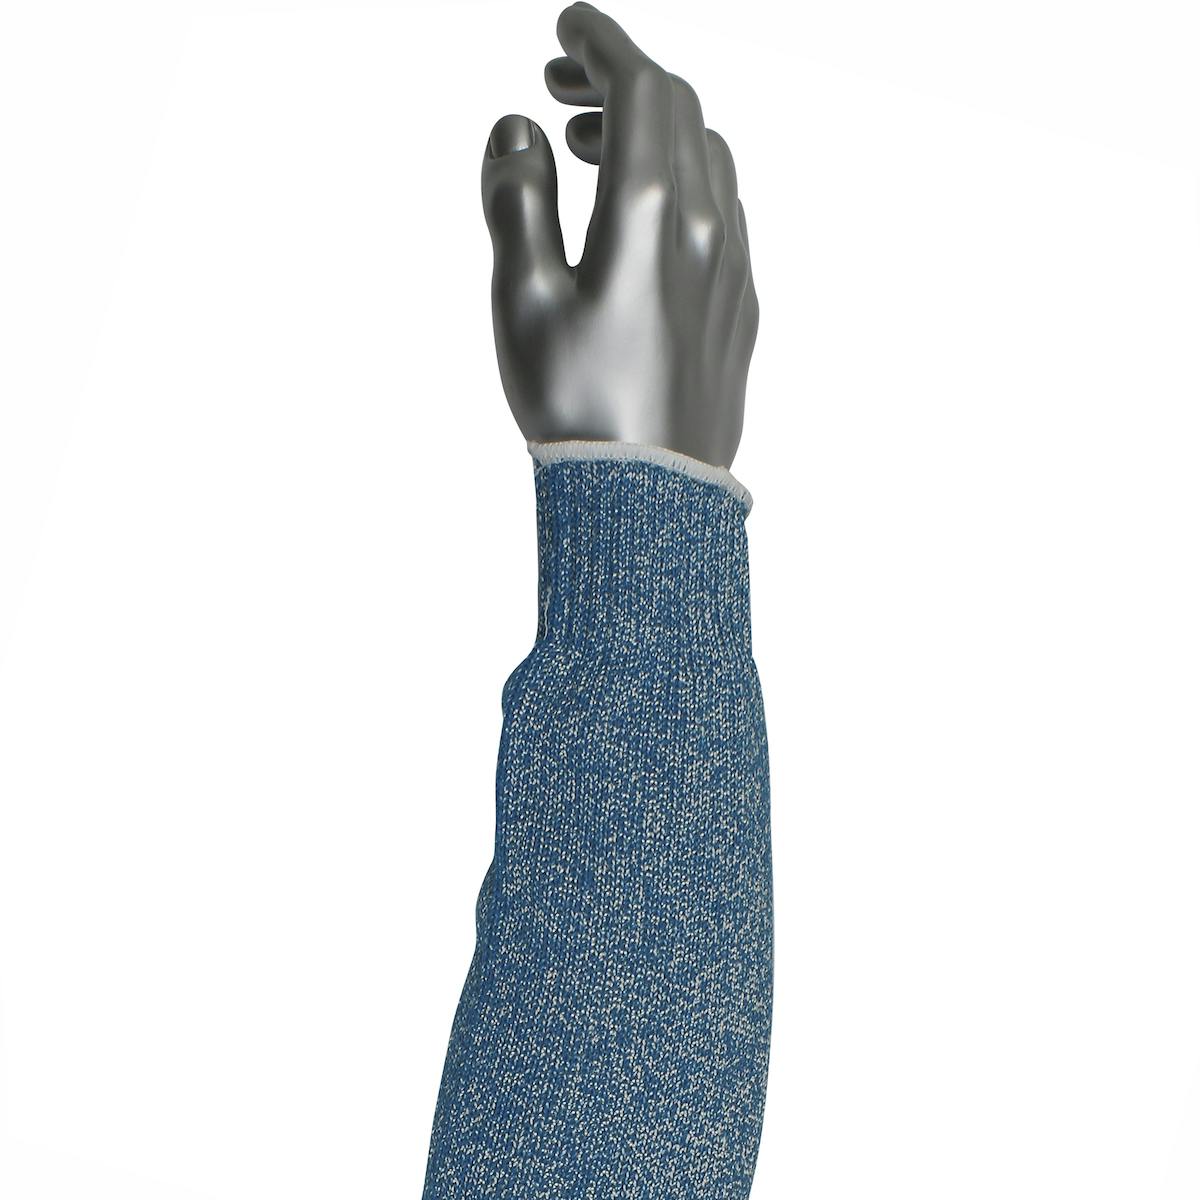 Single-Ply HPPE / Steel Blended Sleeve with Antimicrobial Fibers, Blue (MS-1097) - 22